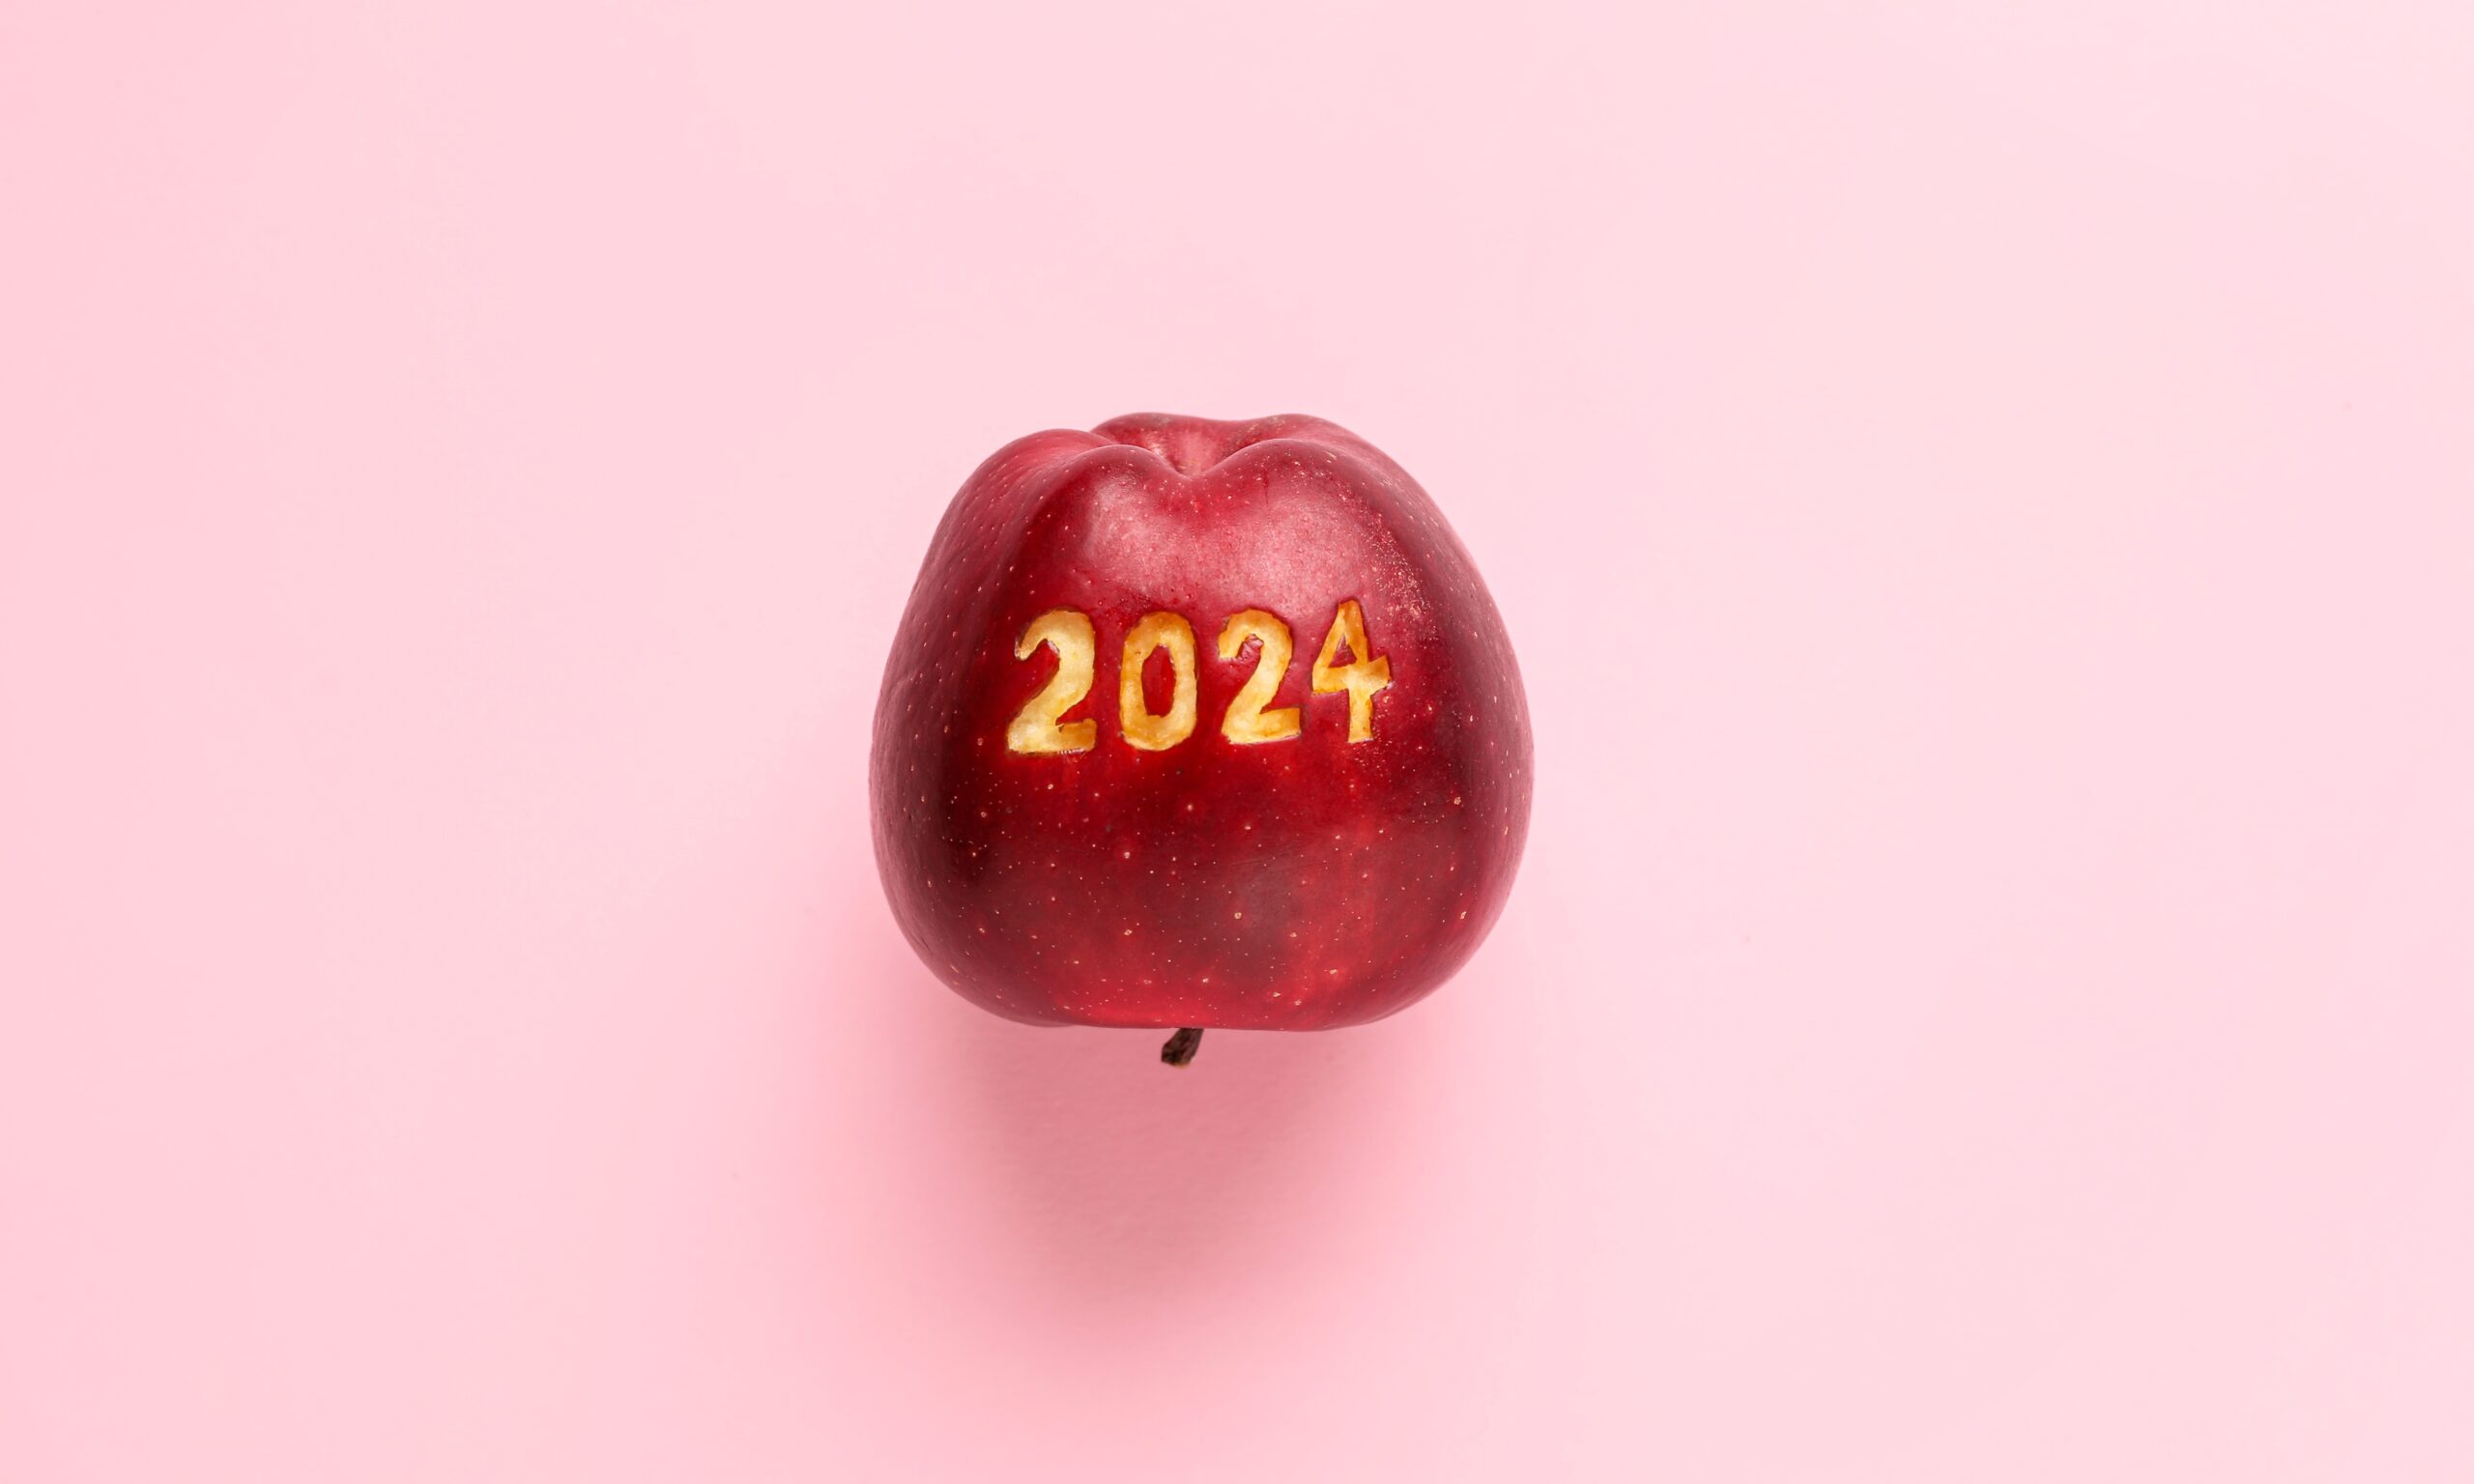 A red apple sits upside down against a light pink background. 2024 is carved into the apple.